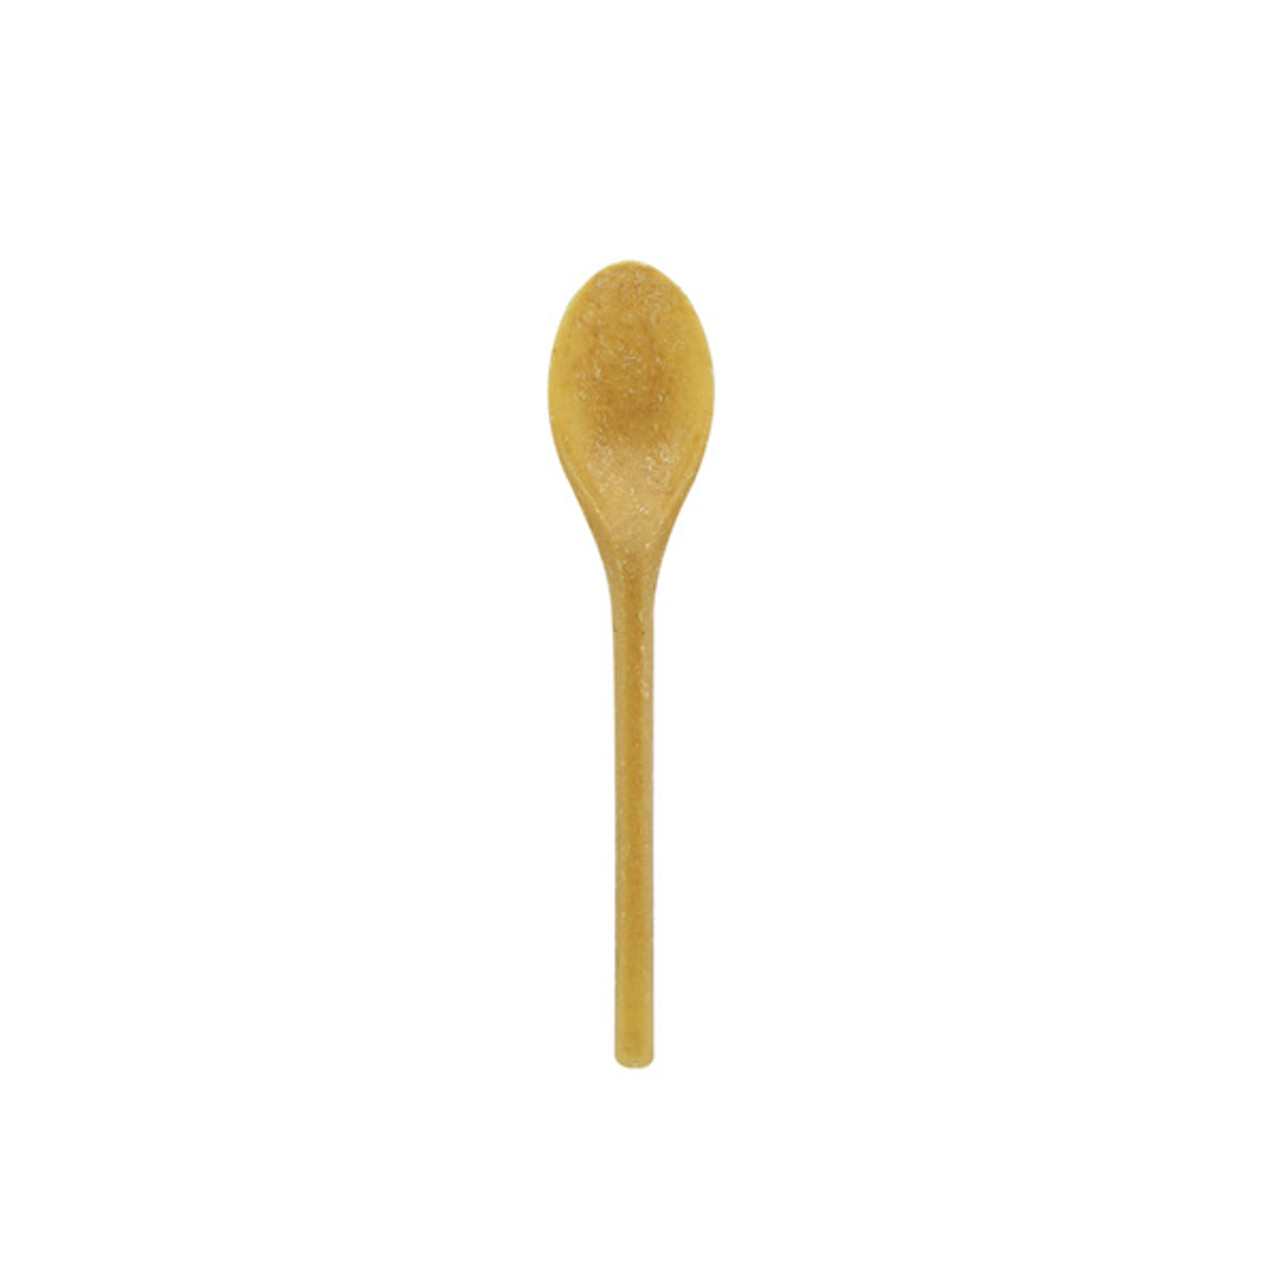 Order a Sample - Small Wood Fiber Composite Spoon 4.92in